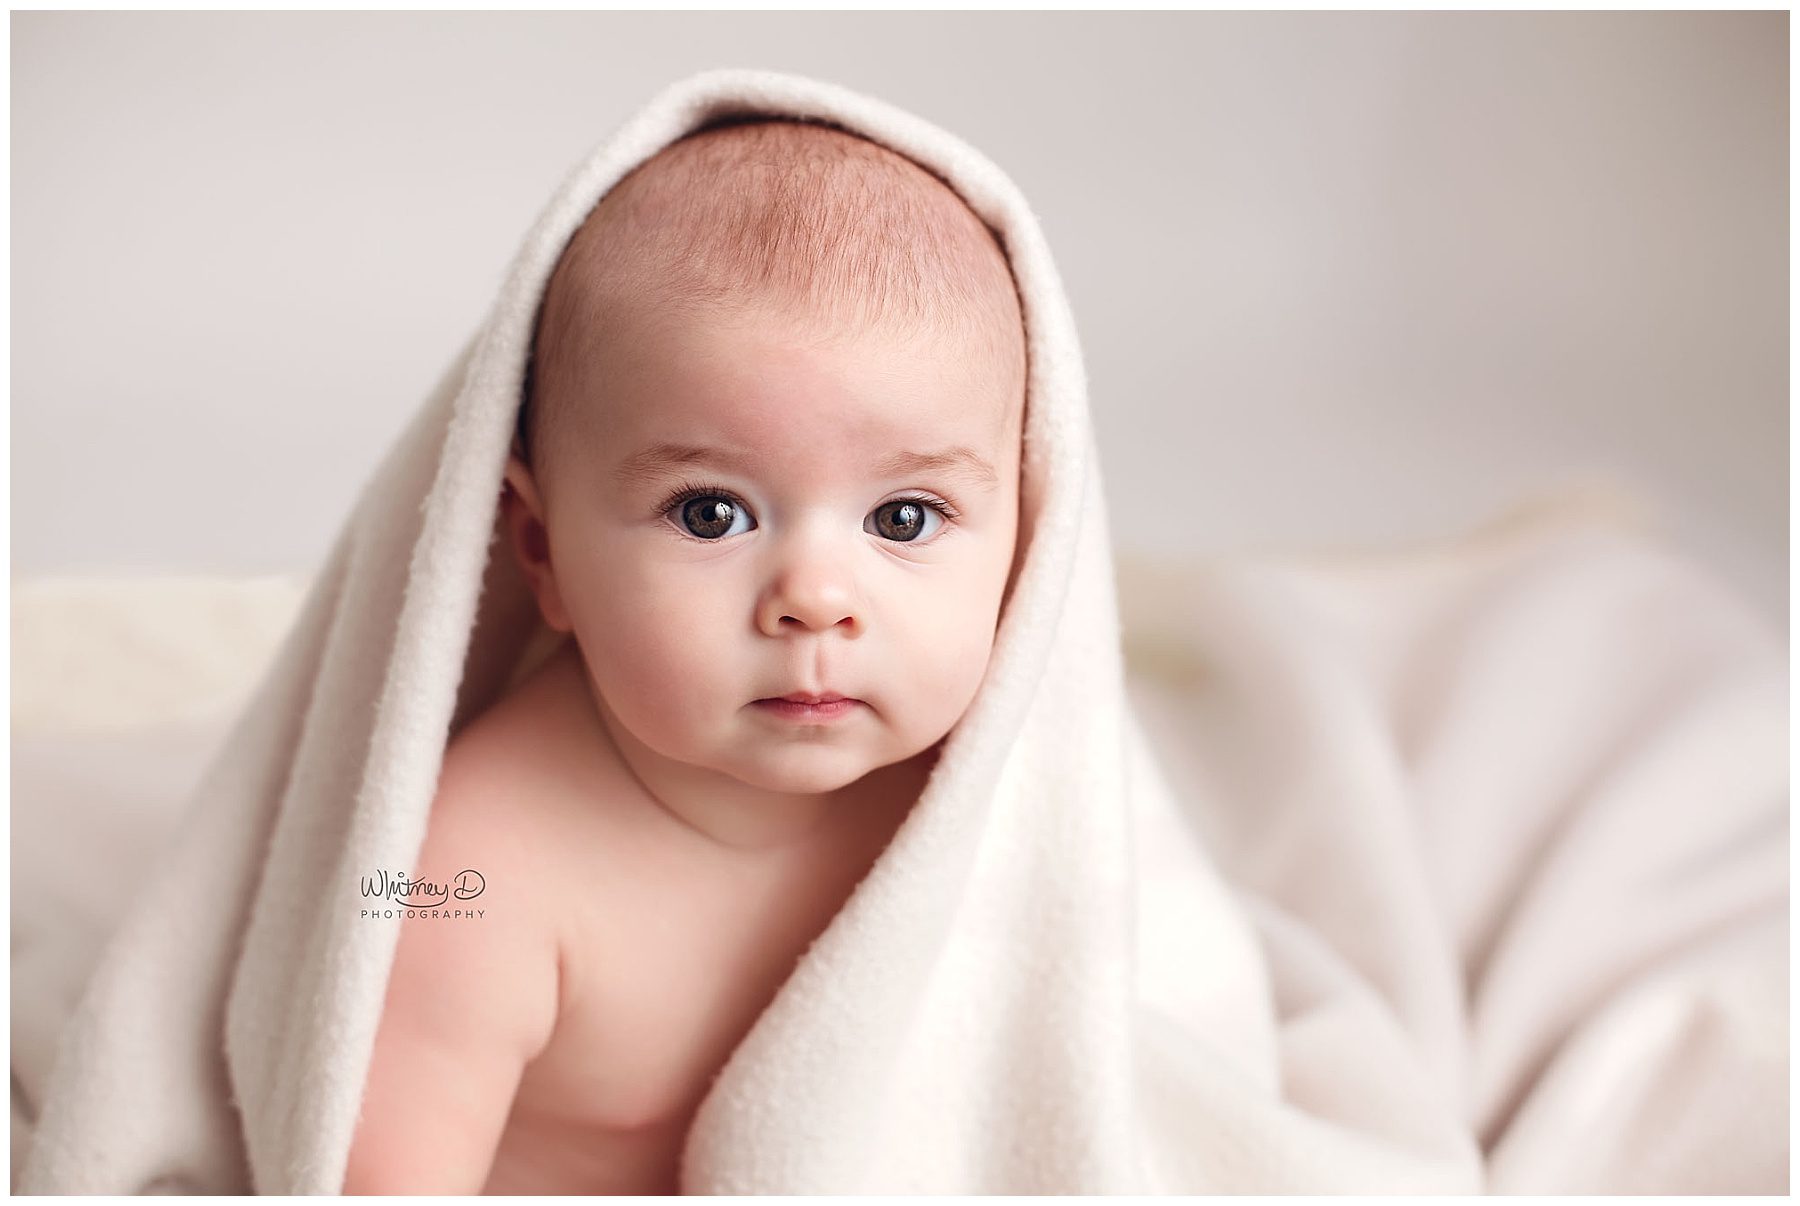 Baby boy posed under blanket at Whitney D. Photography in Conway, Arkansas